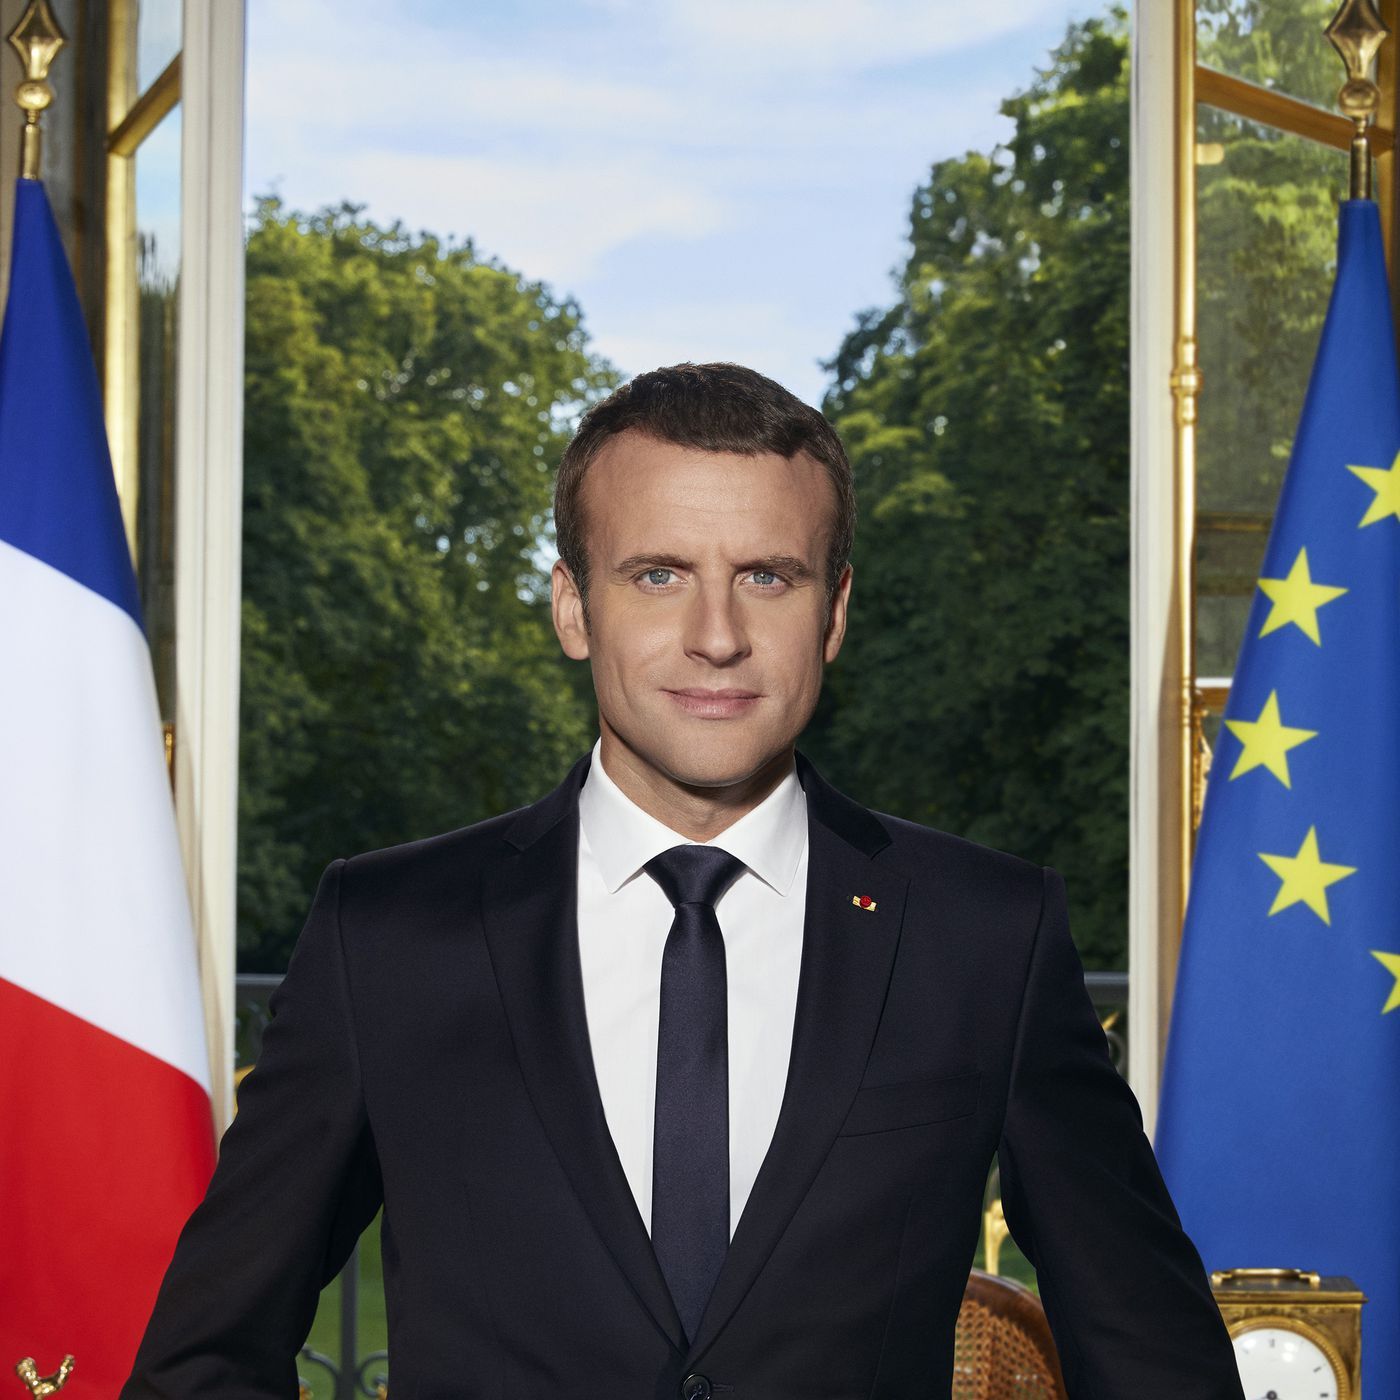 The French president's official photo features two smartphones